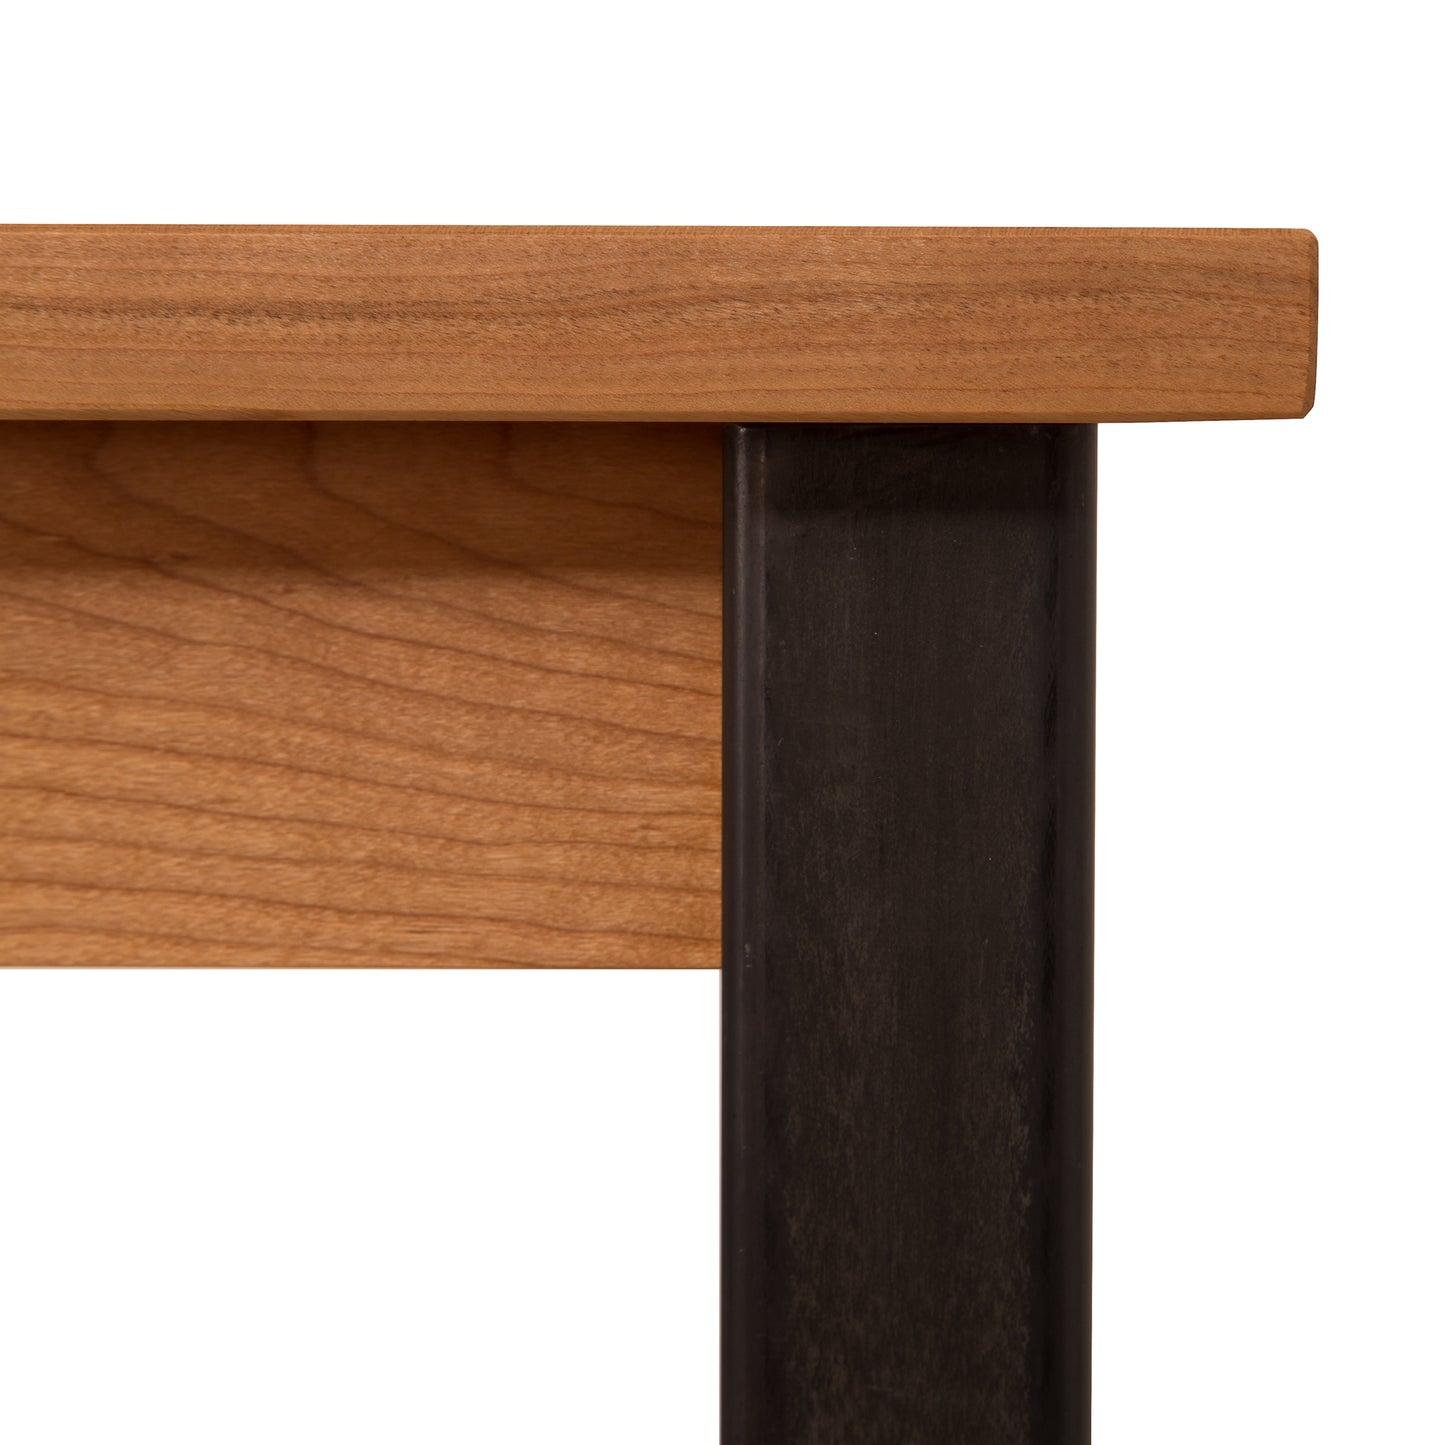 A close up of a Lyndon Furniture Contemporary Farmhouse End Table - Clearance with black legs.